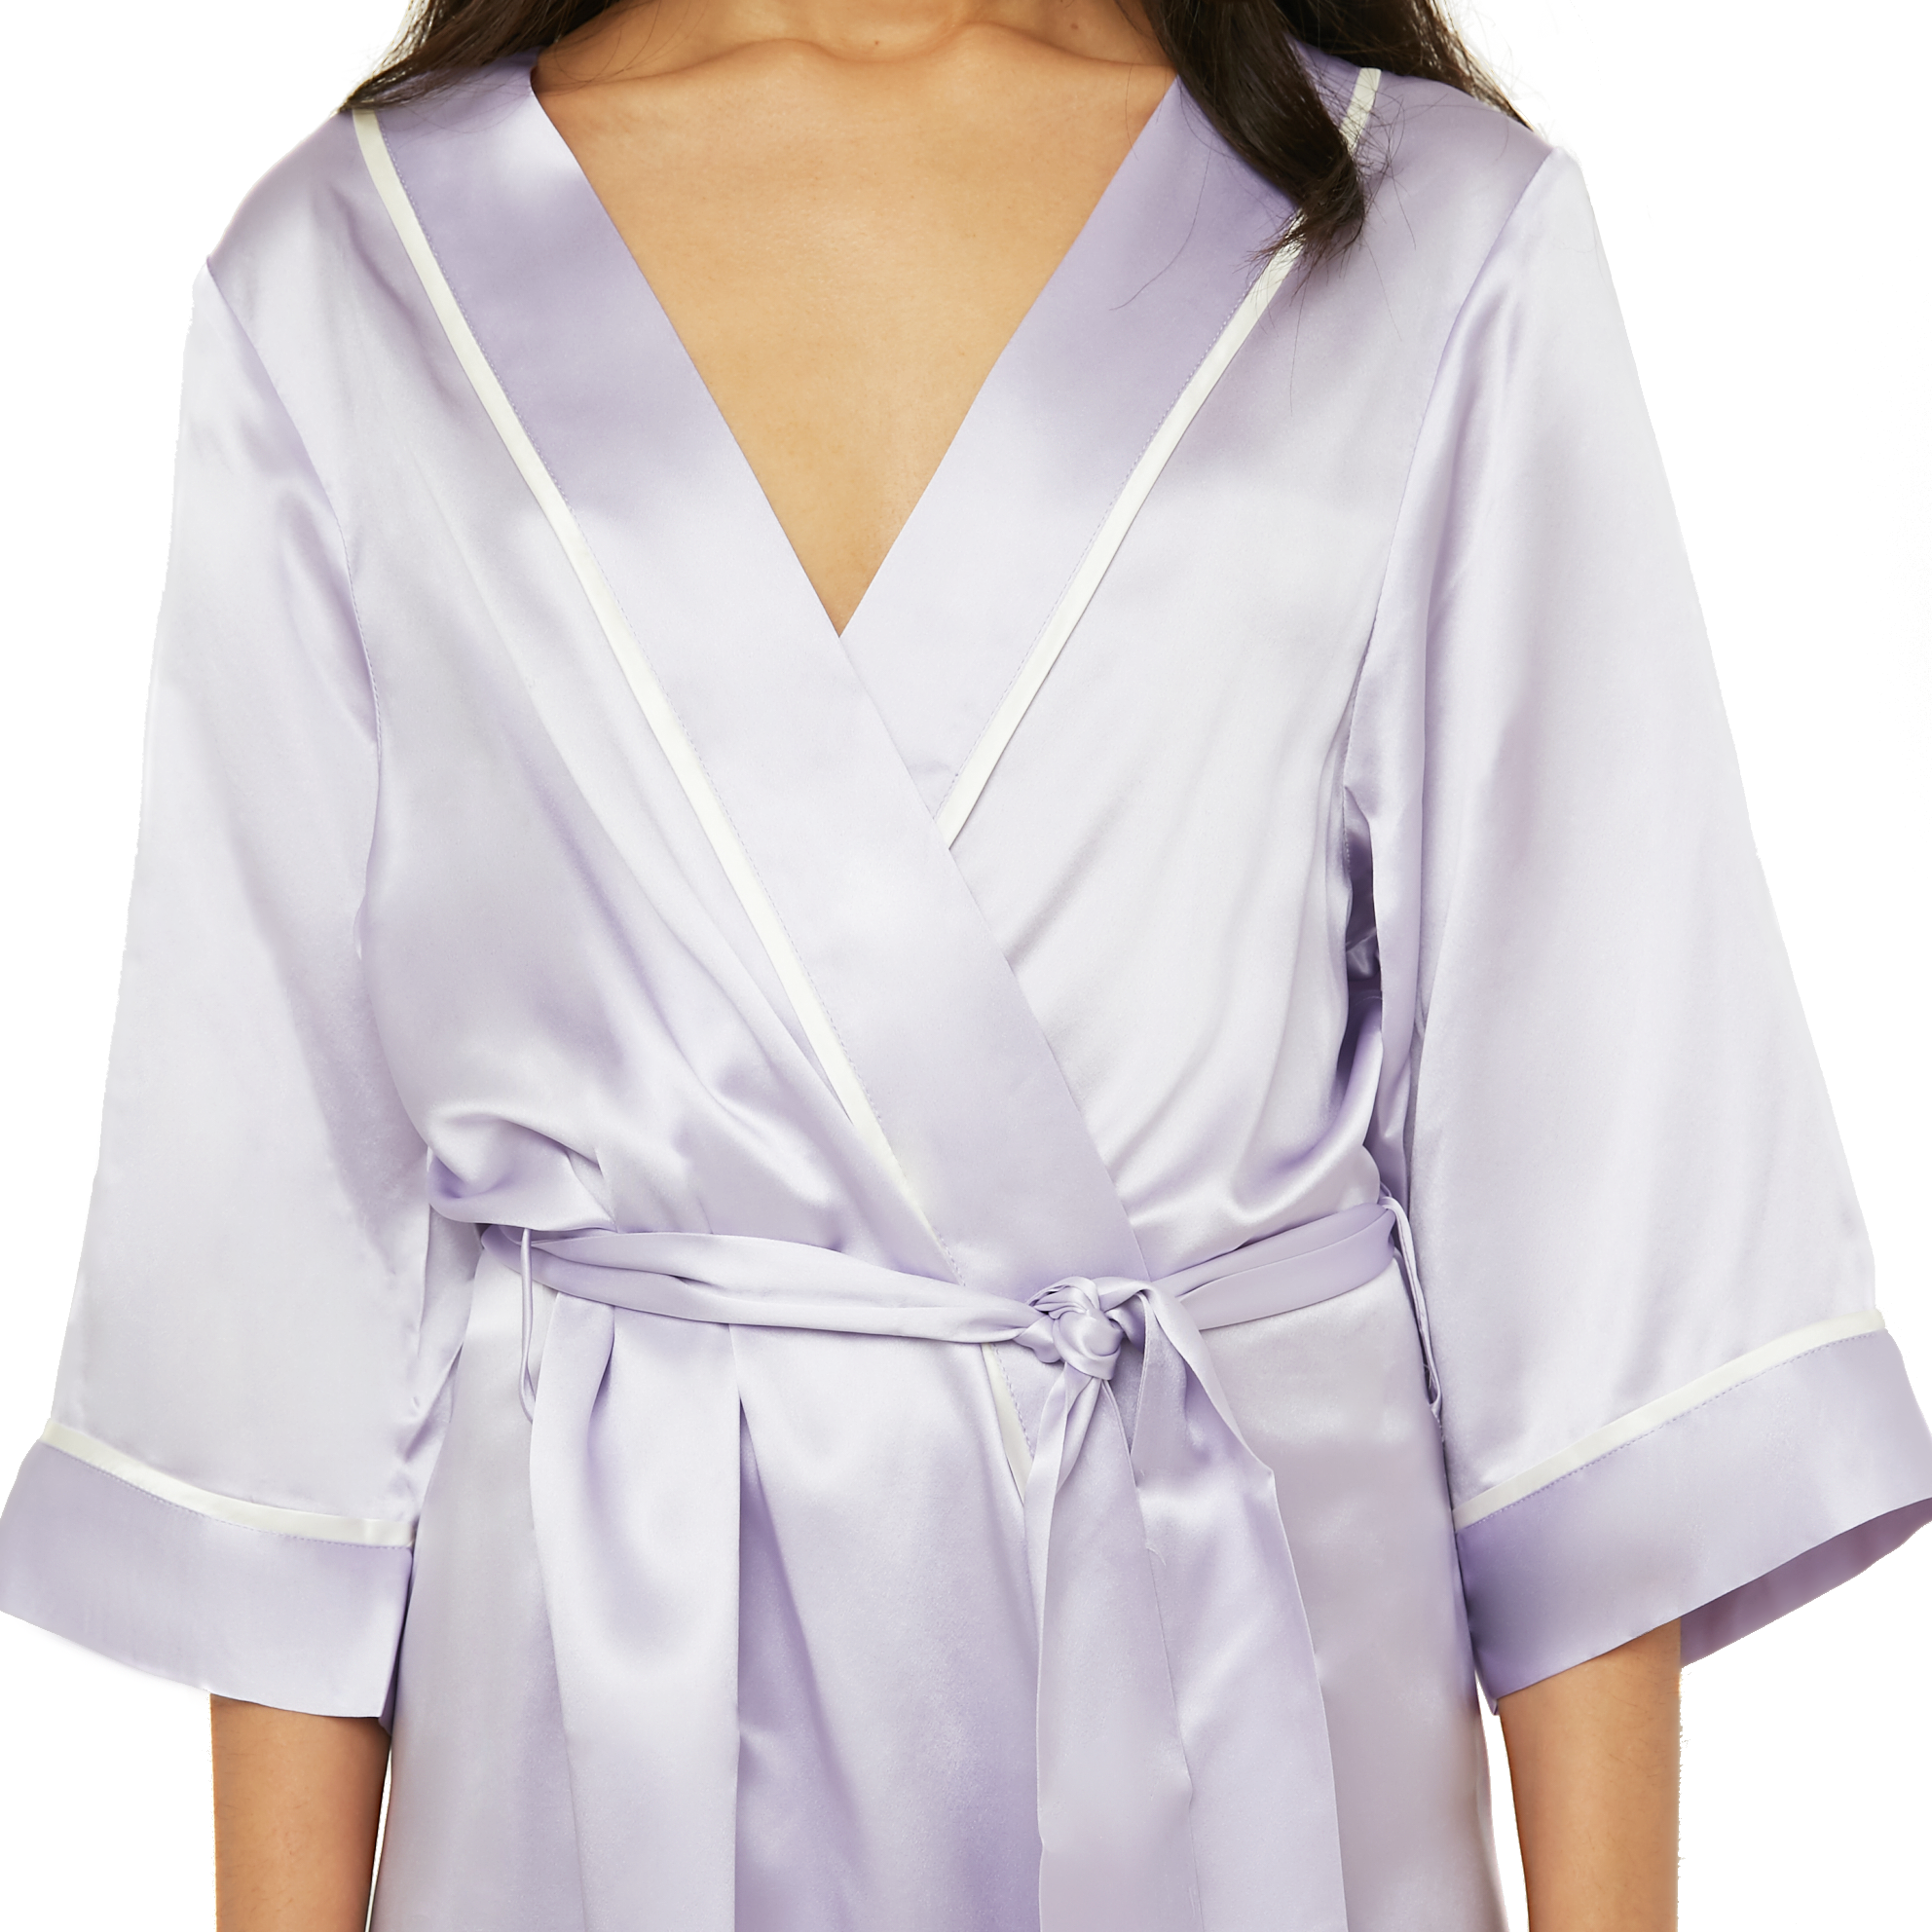 Classic Silk Robe with Contrast Piping - MYK Silk #style_kimono style #color_lavender